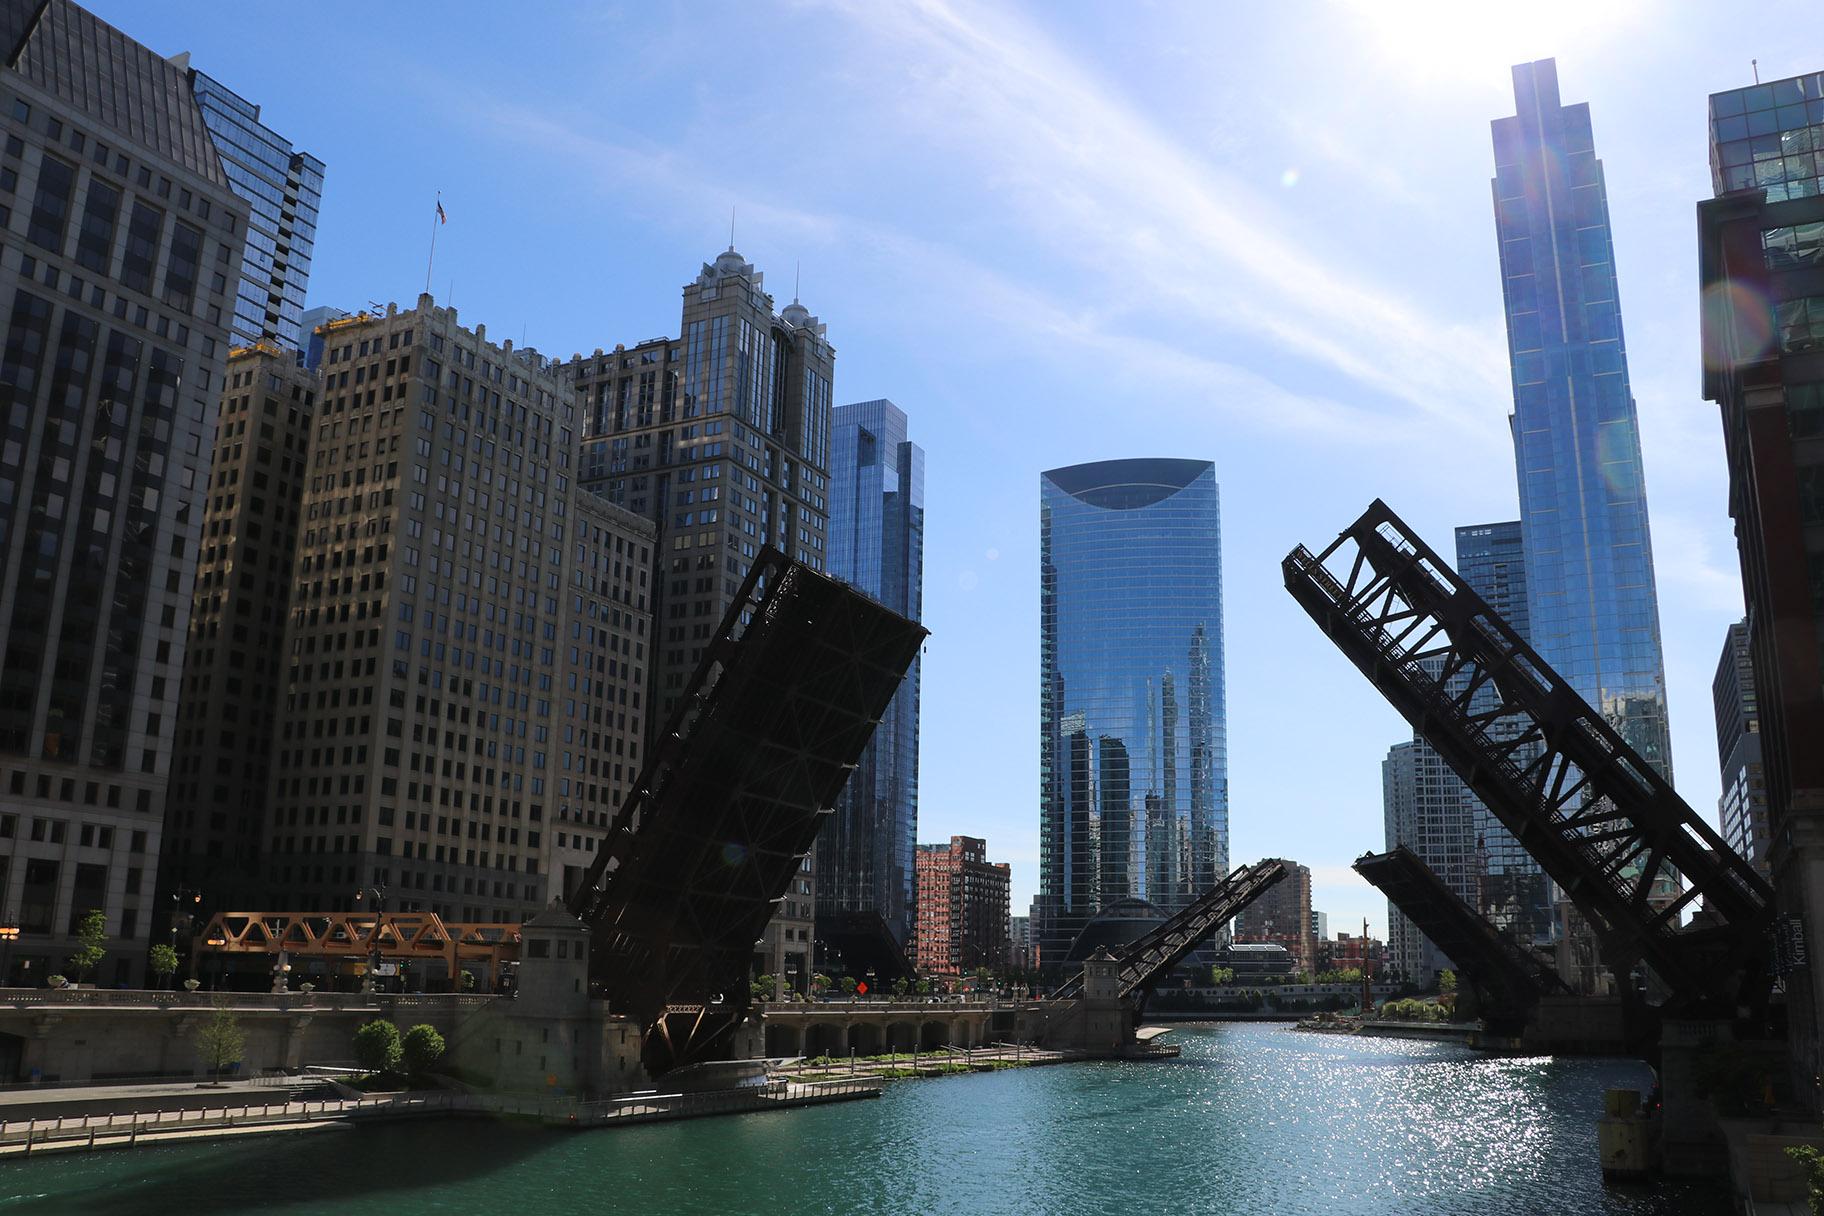 Most of the drawbridges spanning the Chicago River were lifted, presumably to control crowds, during protests Sunday. (Evan Garcia / WTTW News)